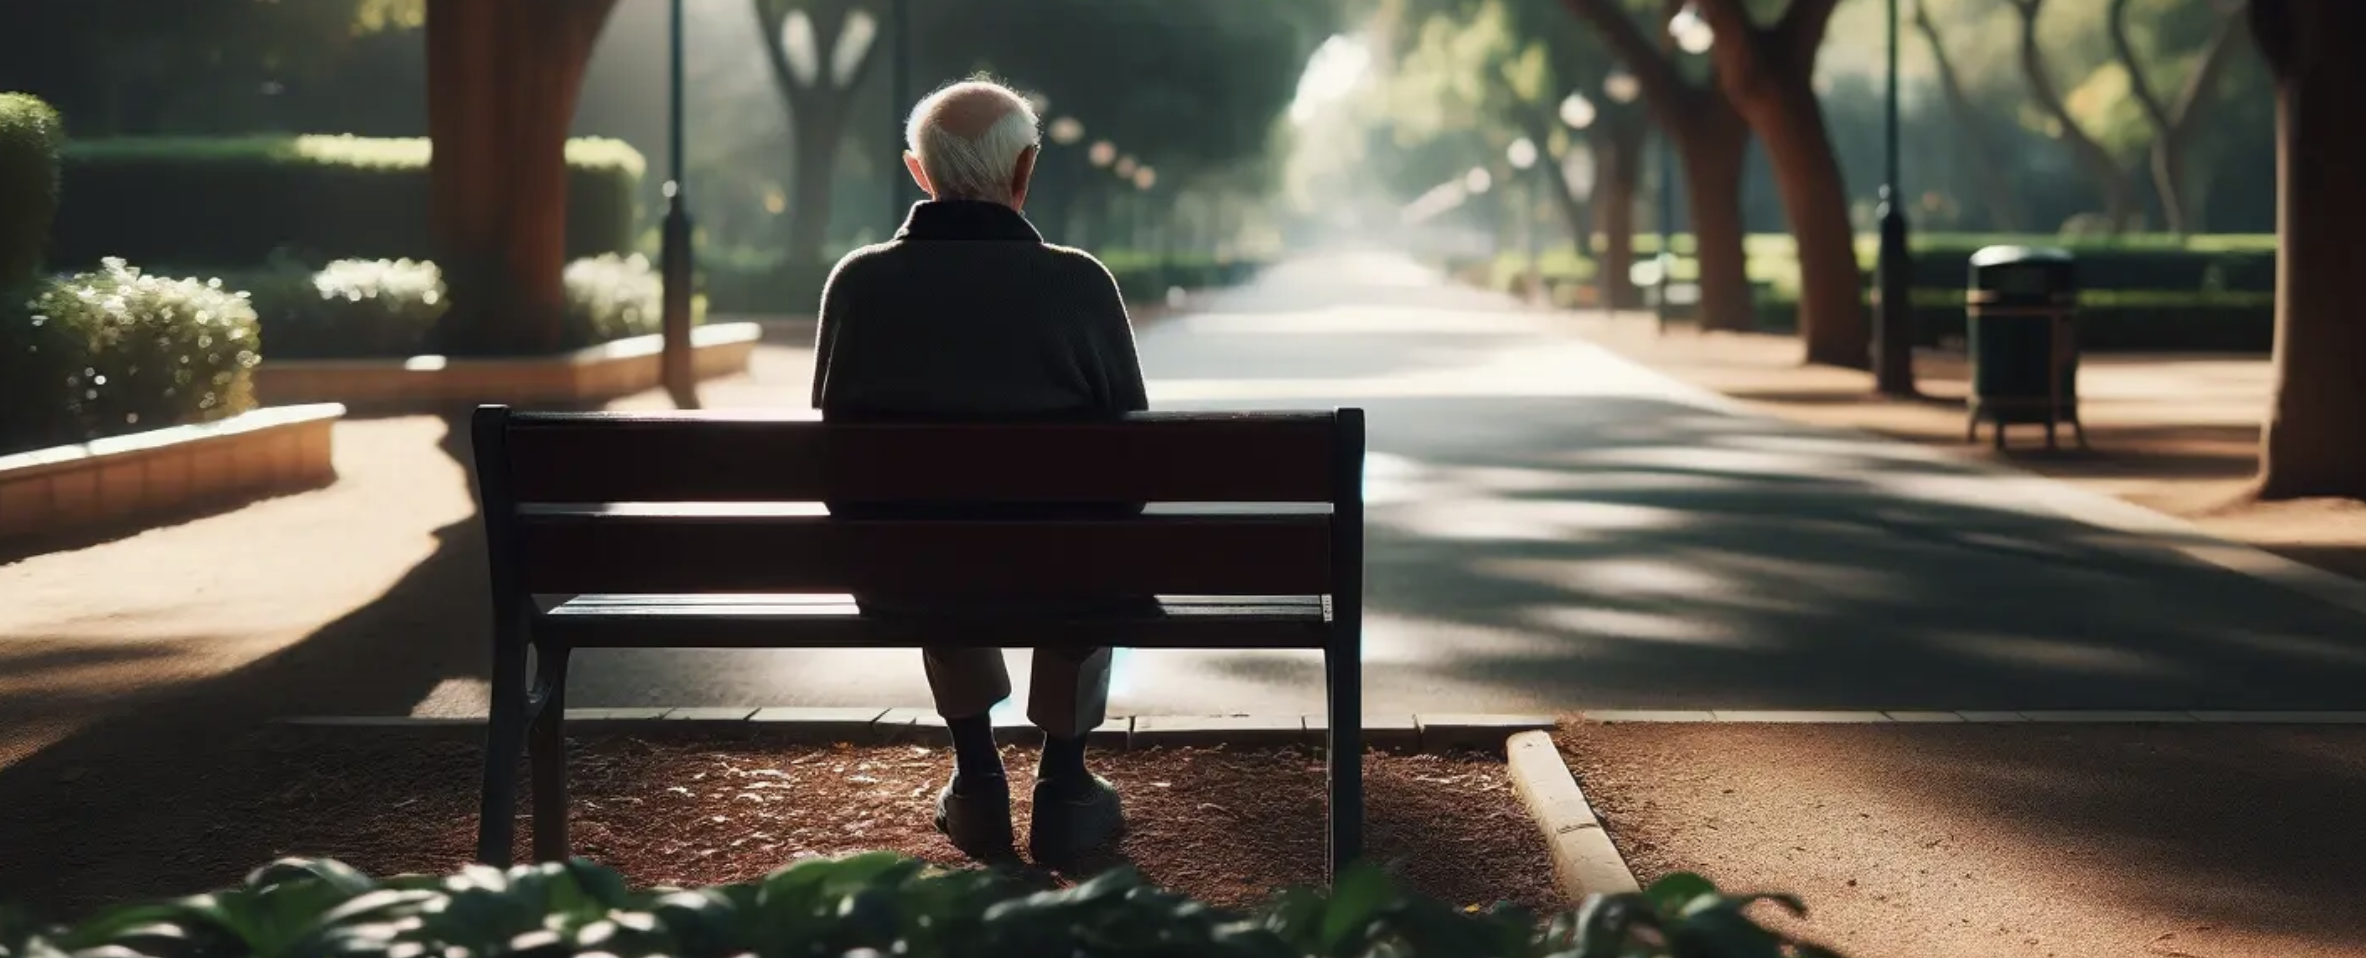 Could AI play a role in tackling later life loneliness?